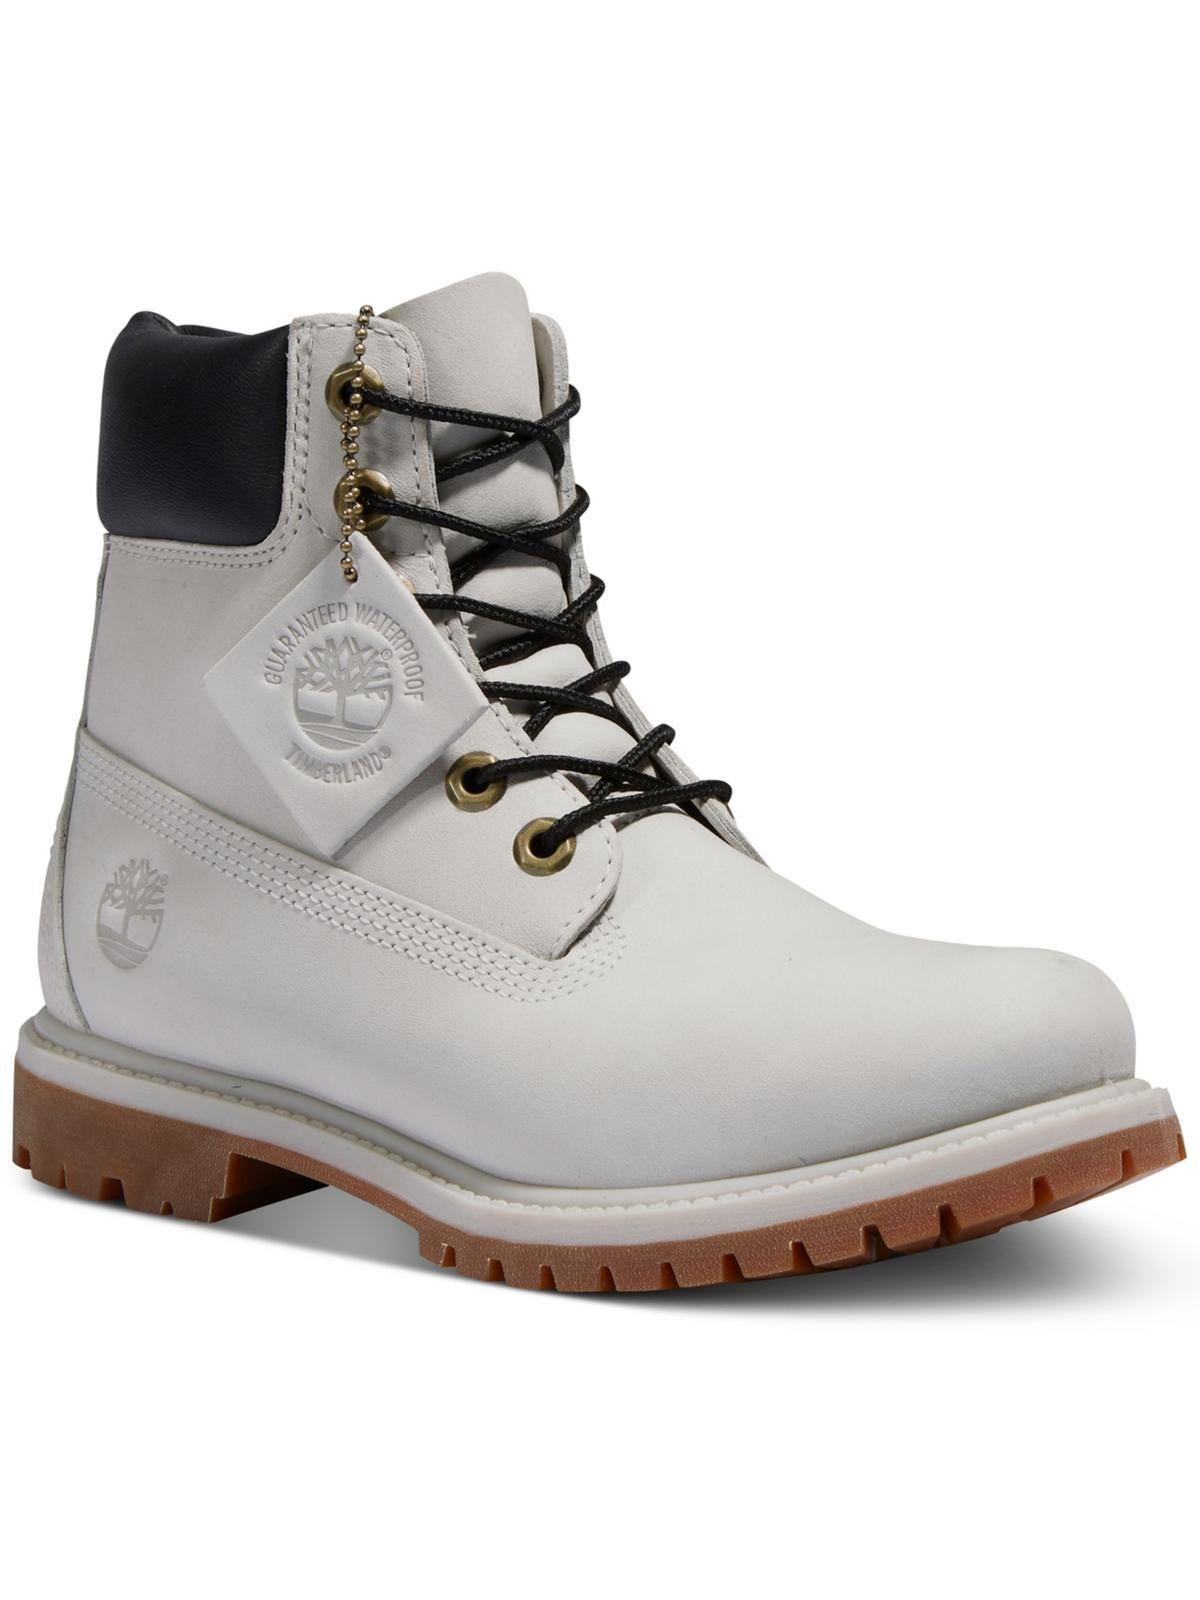 TIMBERLAND 6 IN WATERPROOF Womens Leather Lug Sole Ankle Boots